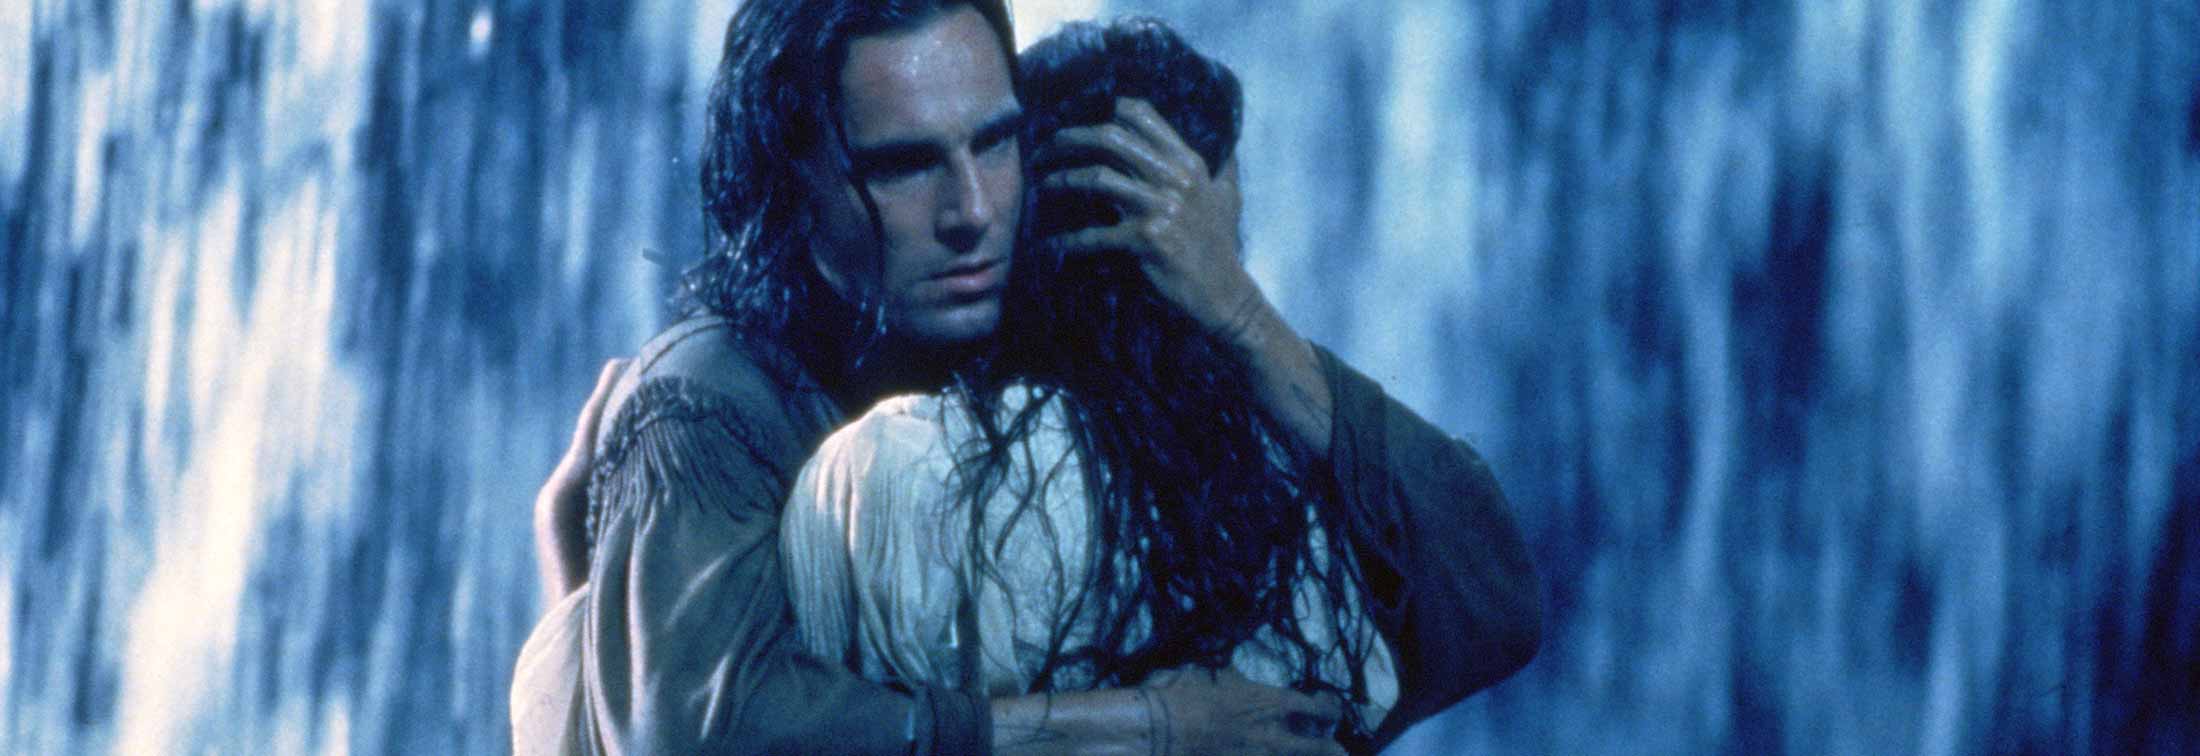 The Last of the Mohicans - Daniel Day-Lewis' beautiful historical love story